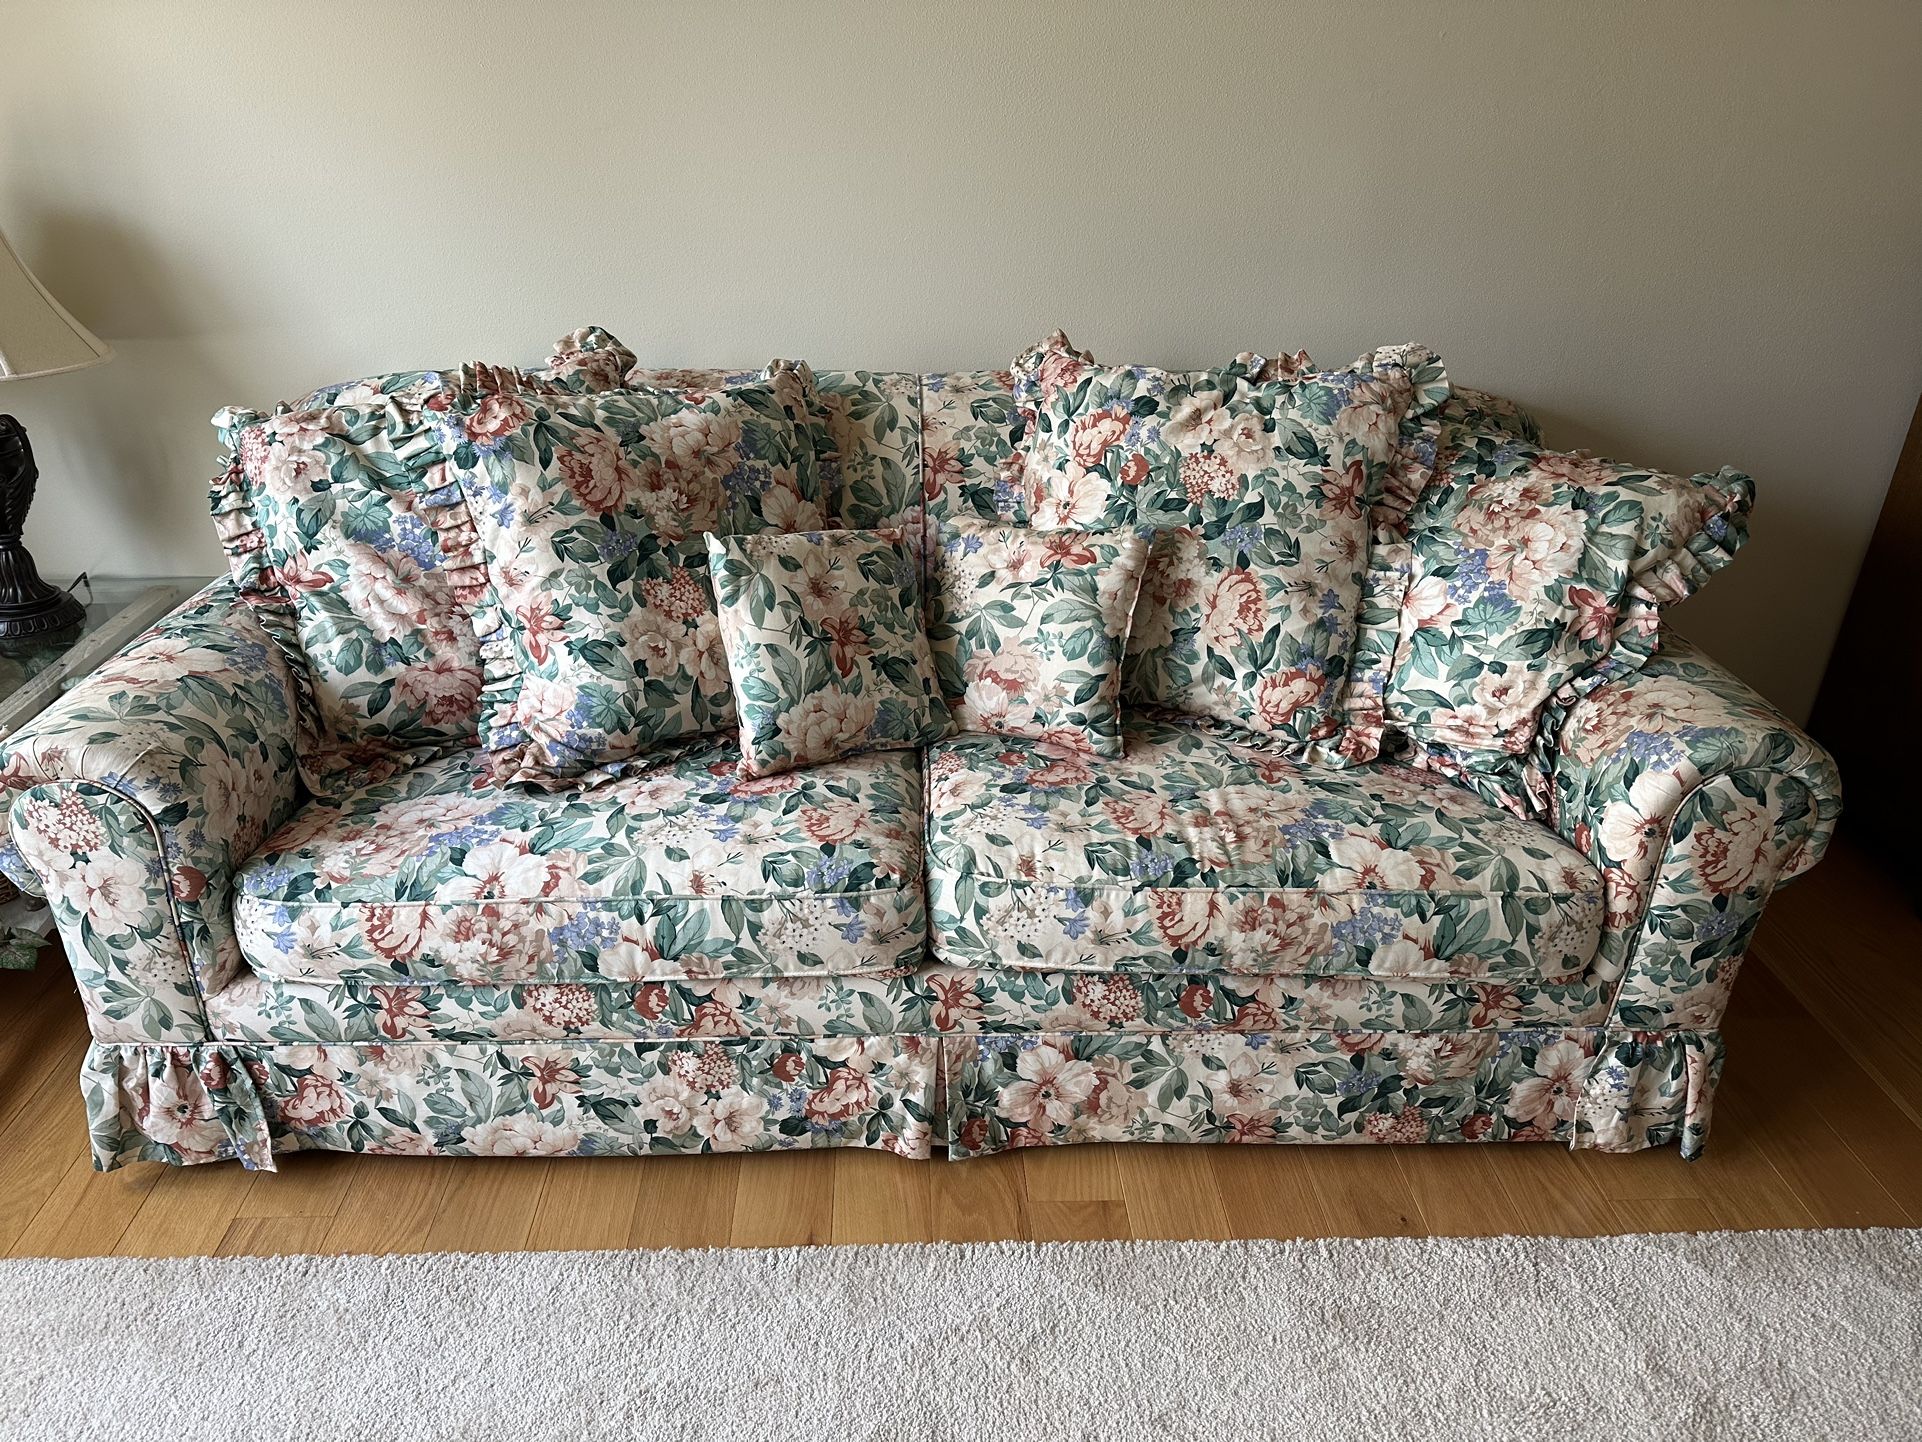 Kingsdown Sofa Sleeper, Queen Size, Floral Print, Six Throw Pillows, Excellent Condition!